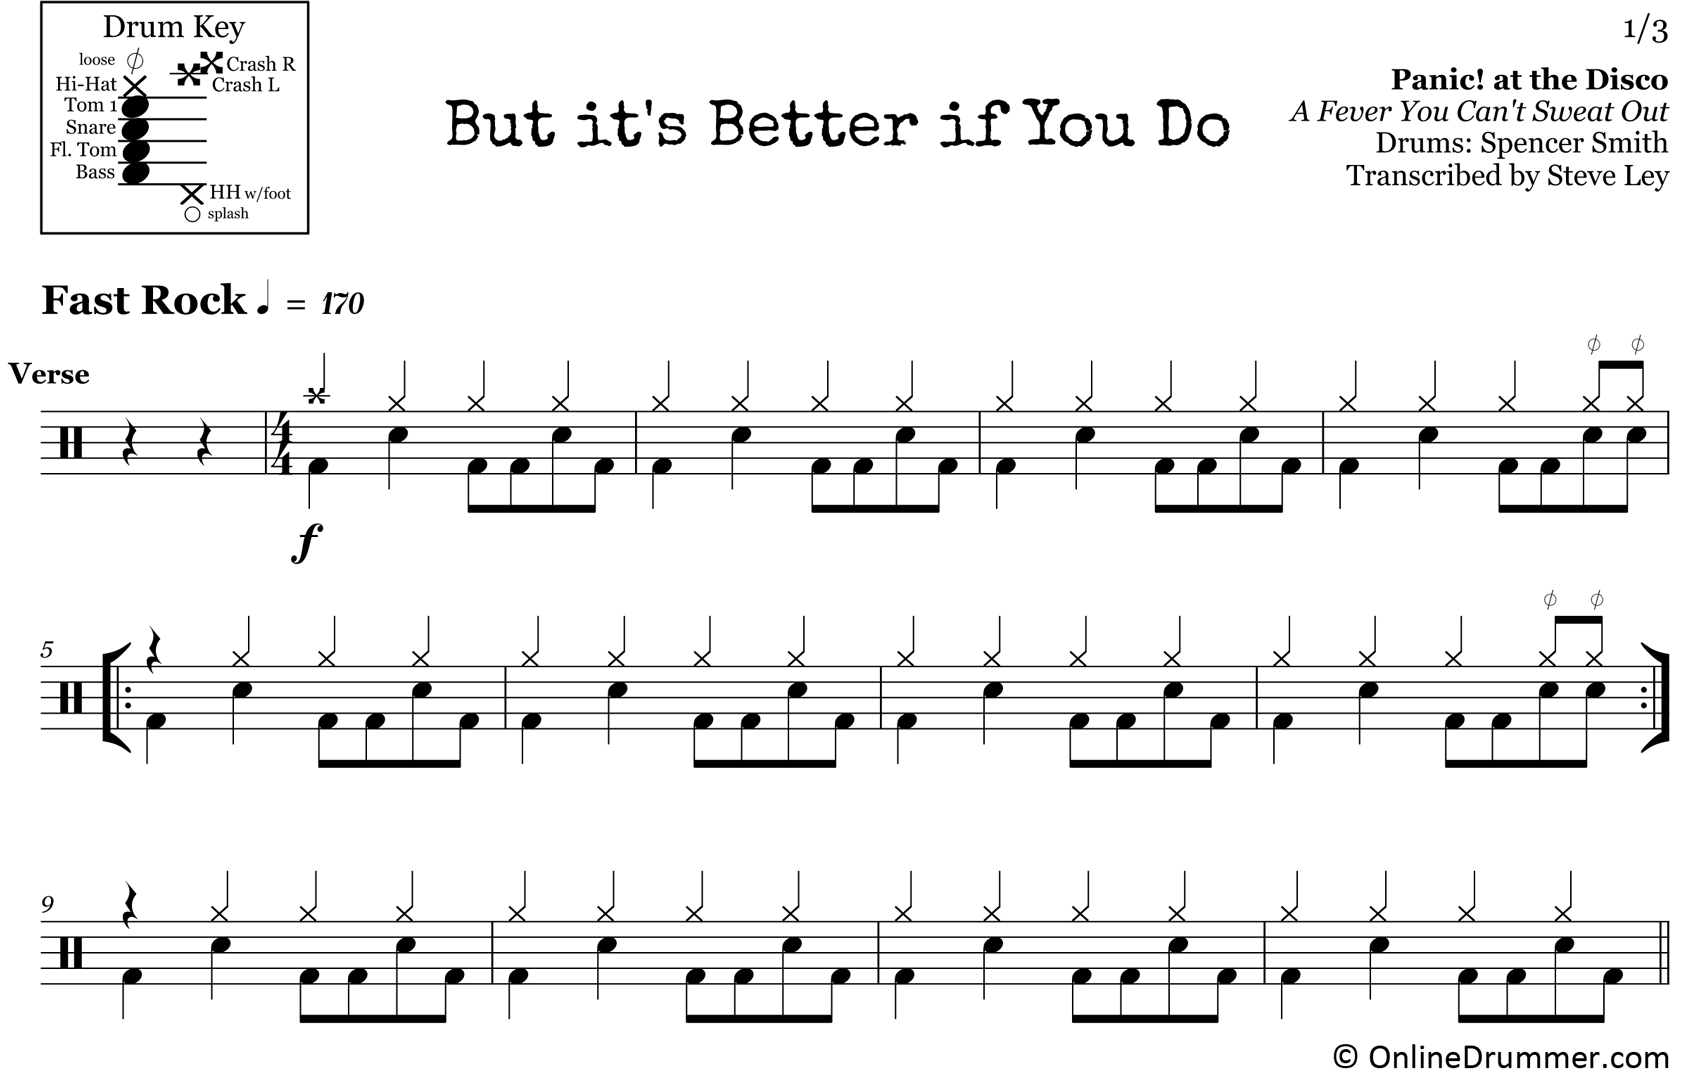 But It's Better If You Do - Panic! At The Disco - Drum Sheet Music